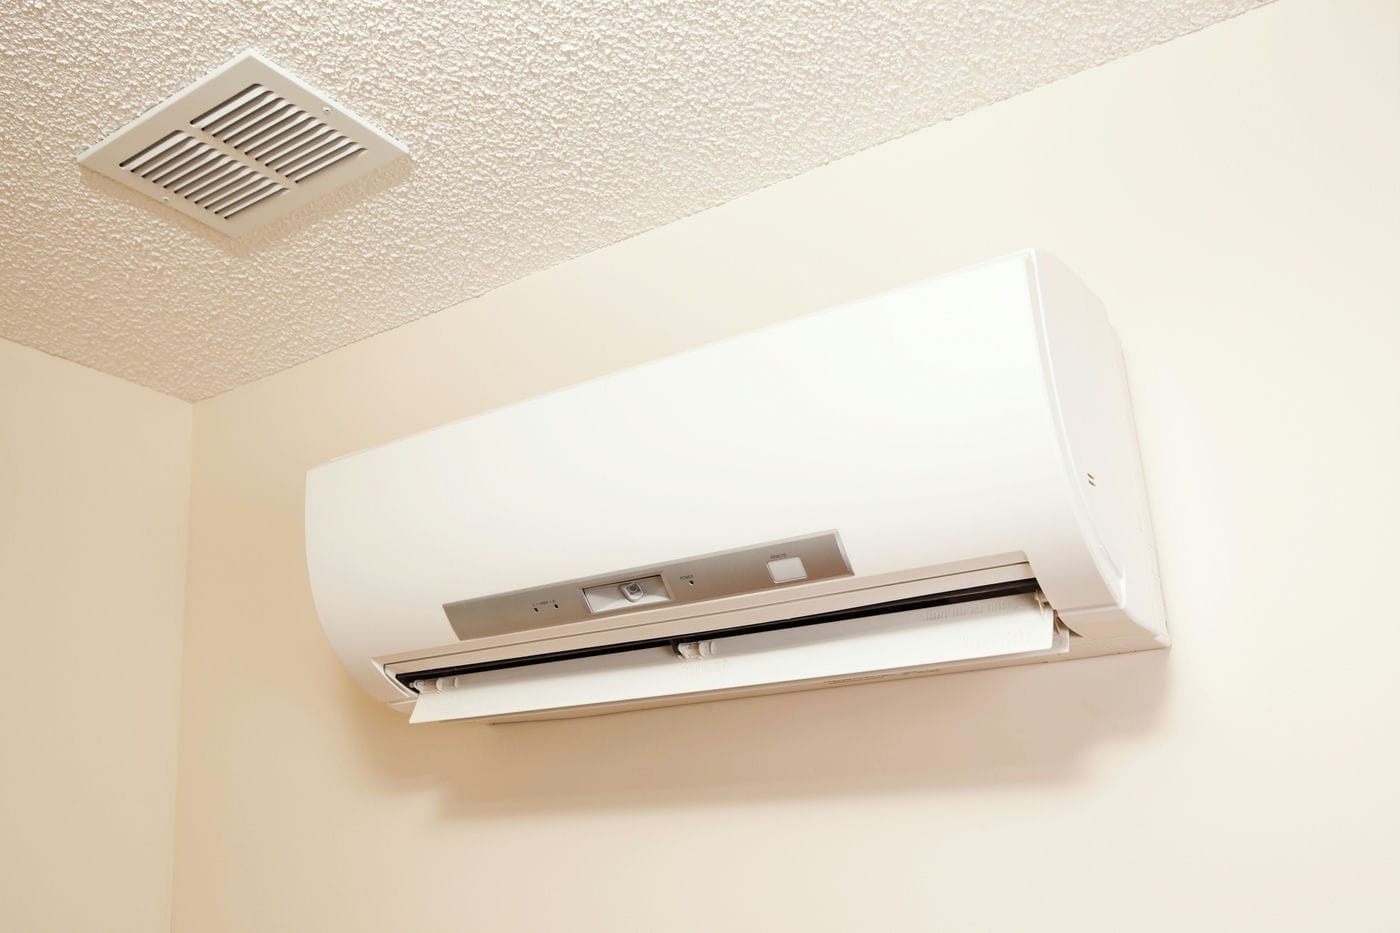 ductless heat pump system